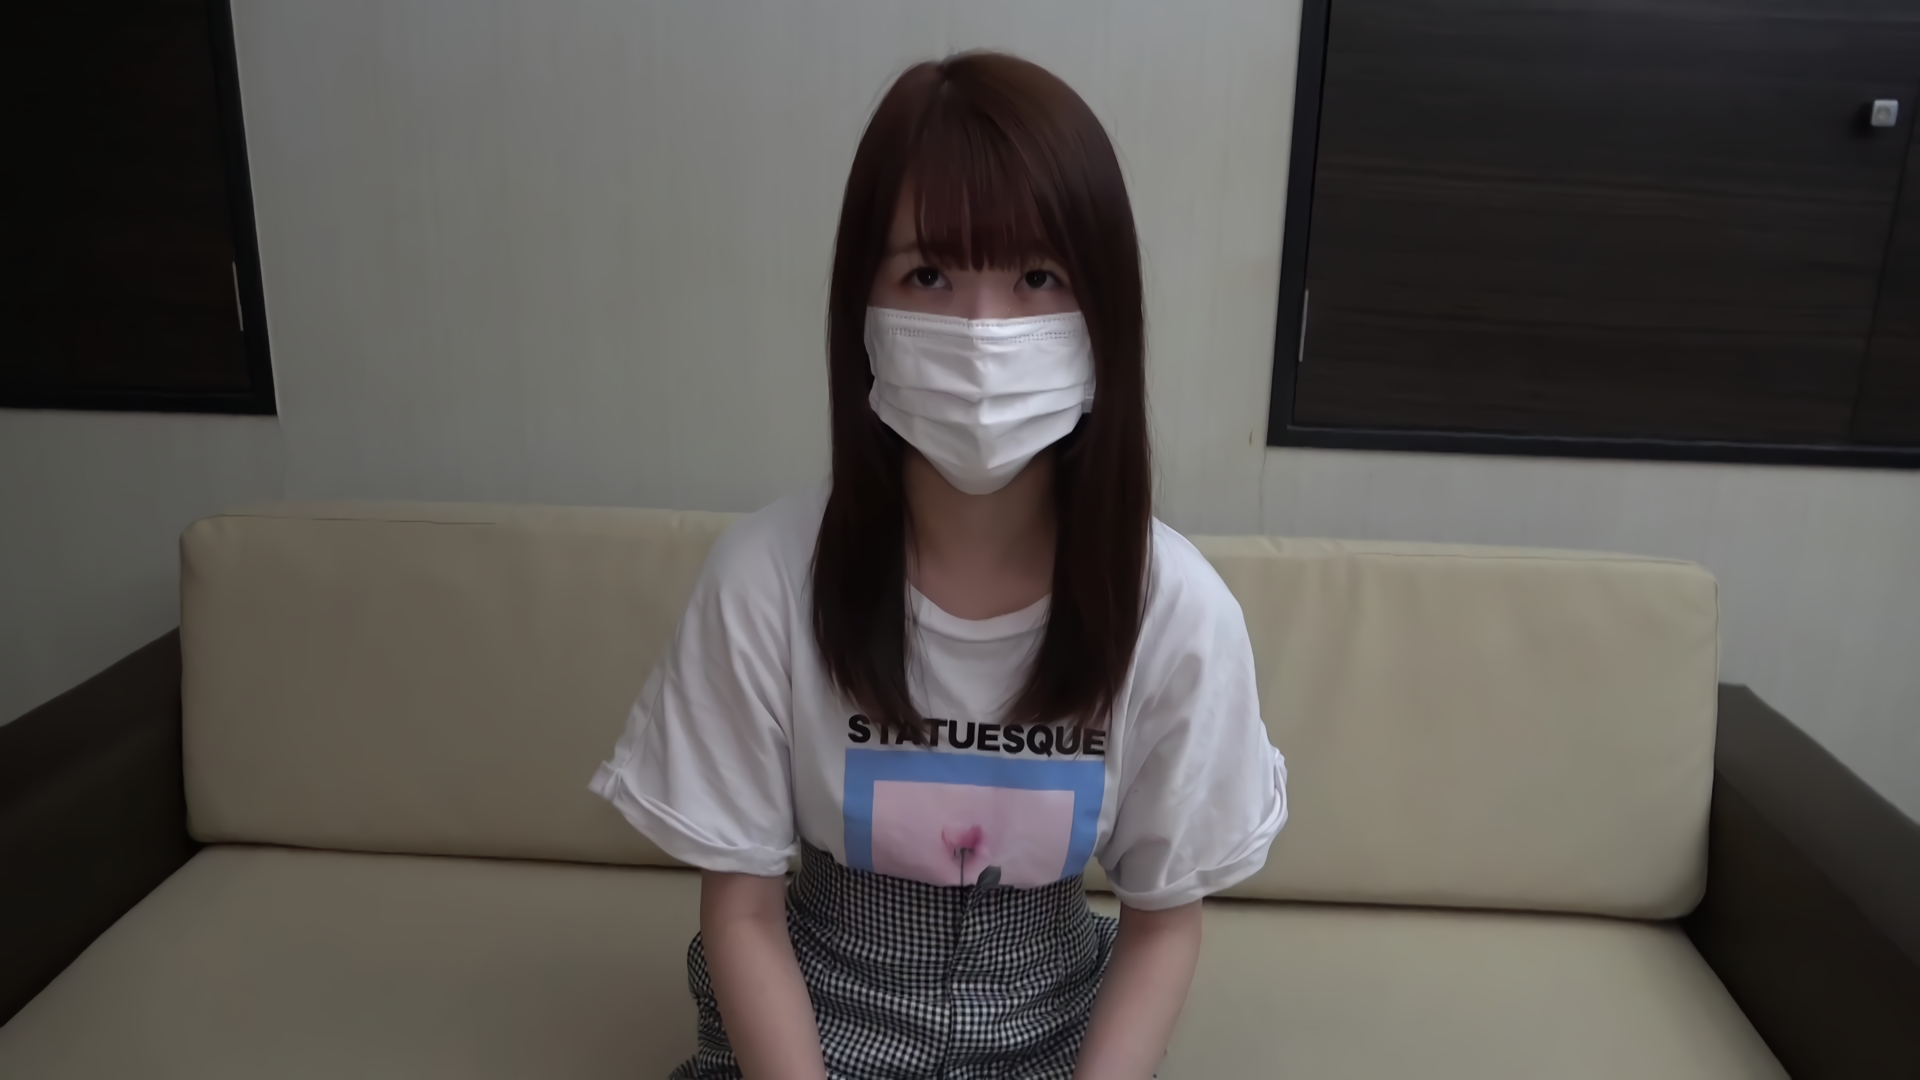 By all means only the face The 18-year-old slender beauty student of 155 cm hides her face and does not hide her pussy